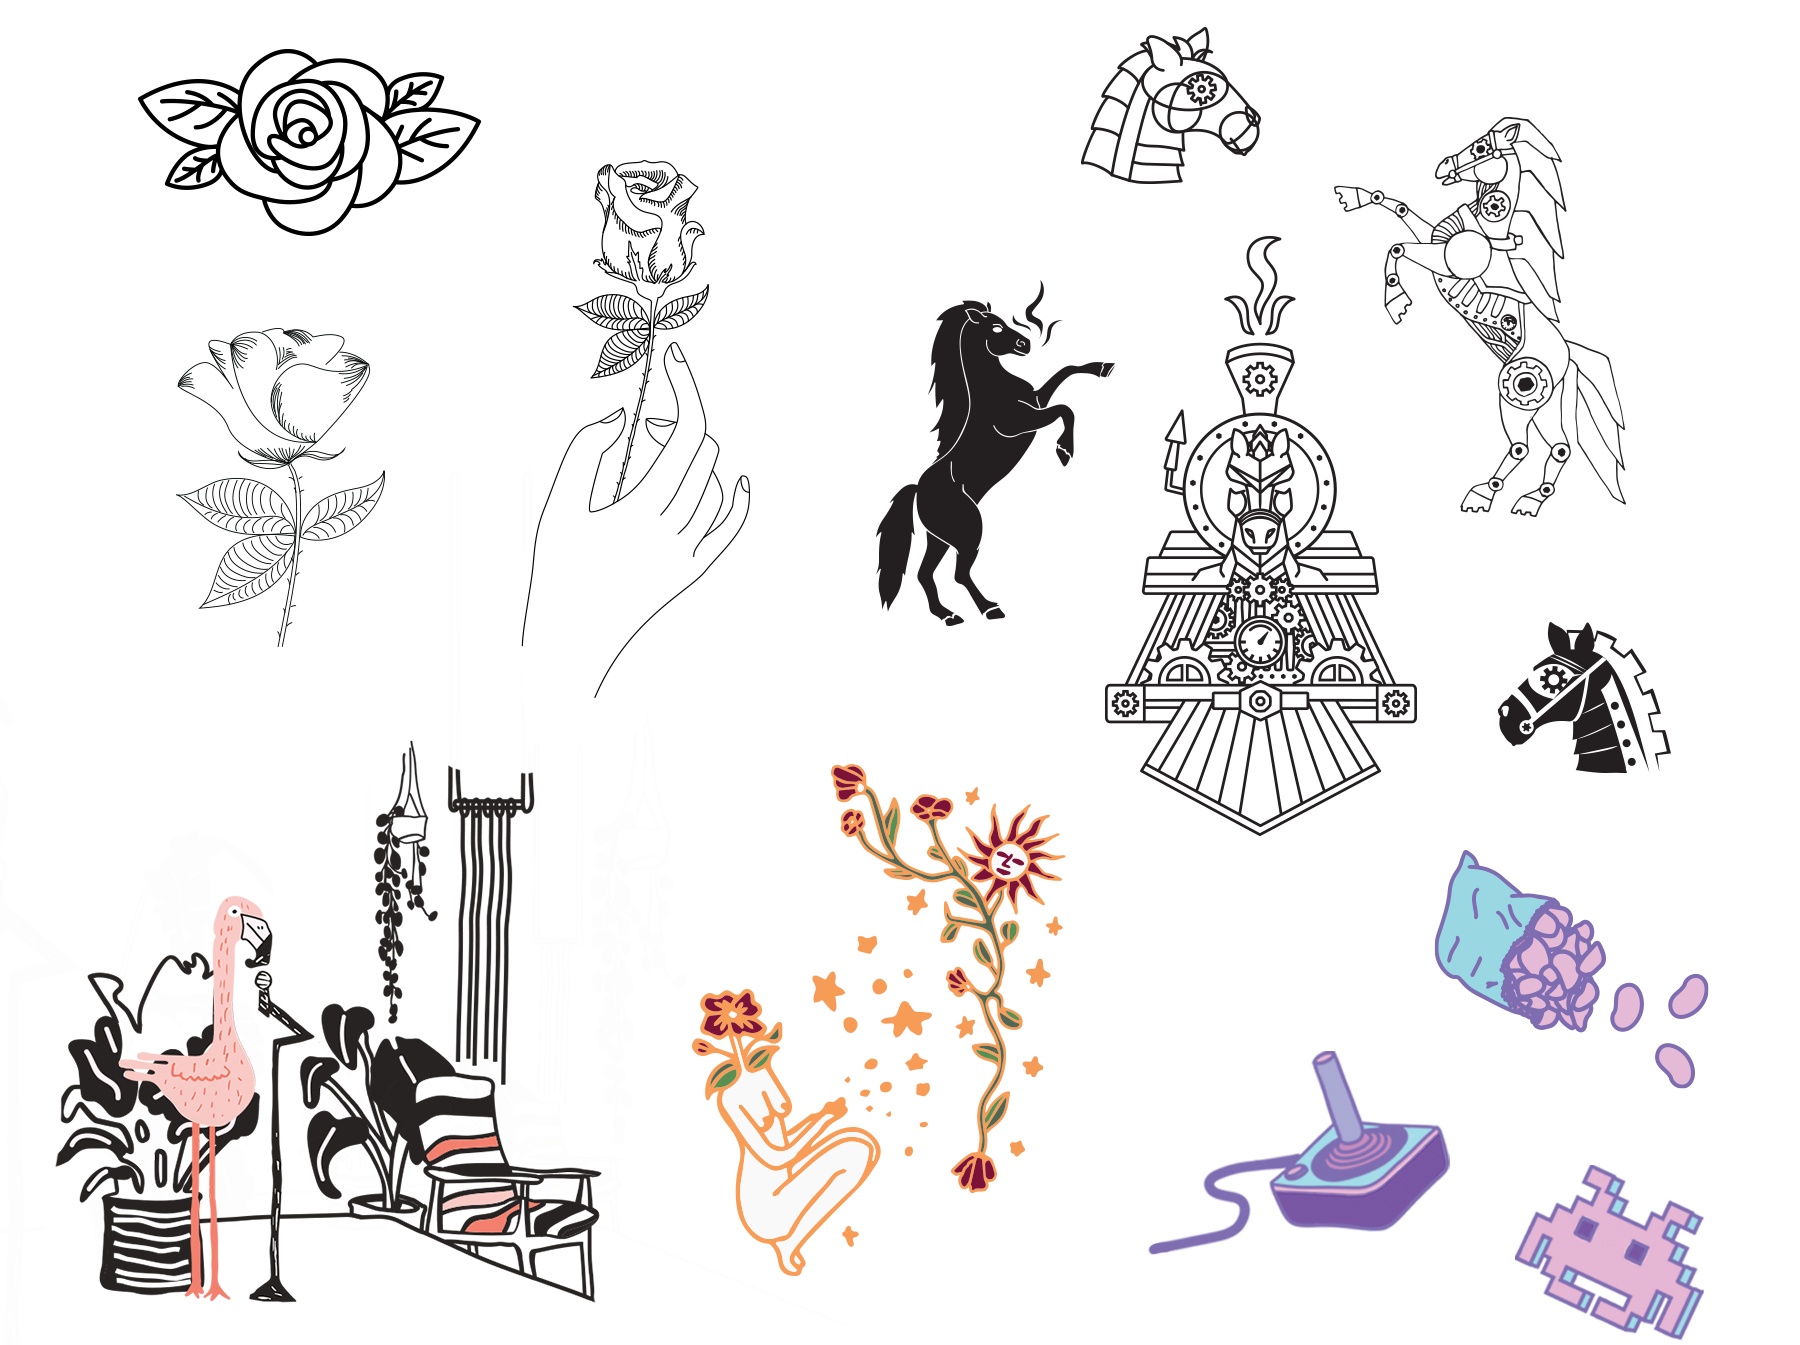 Illustrations of roses, steampunk inspired horses & train, a flamingo on a stage, a nude woman with a flower for a head, a botanical vine, and retro gaming icons.